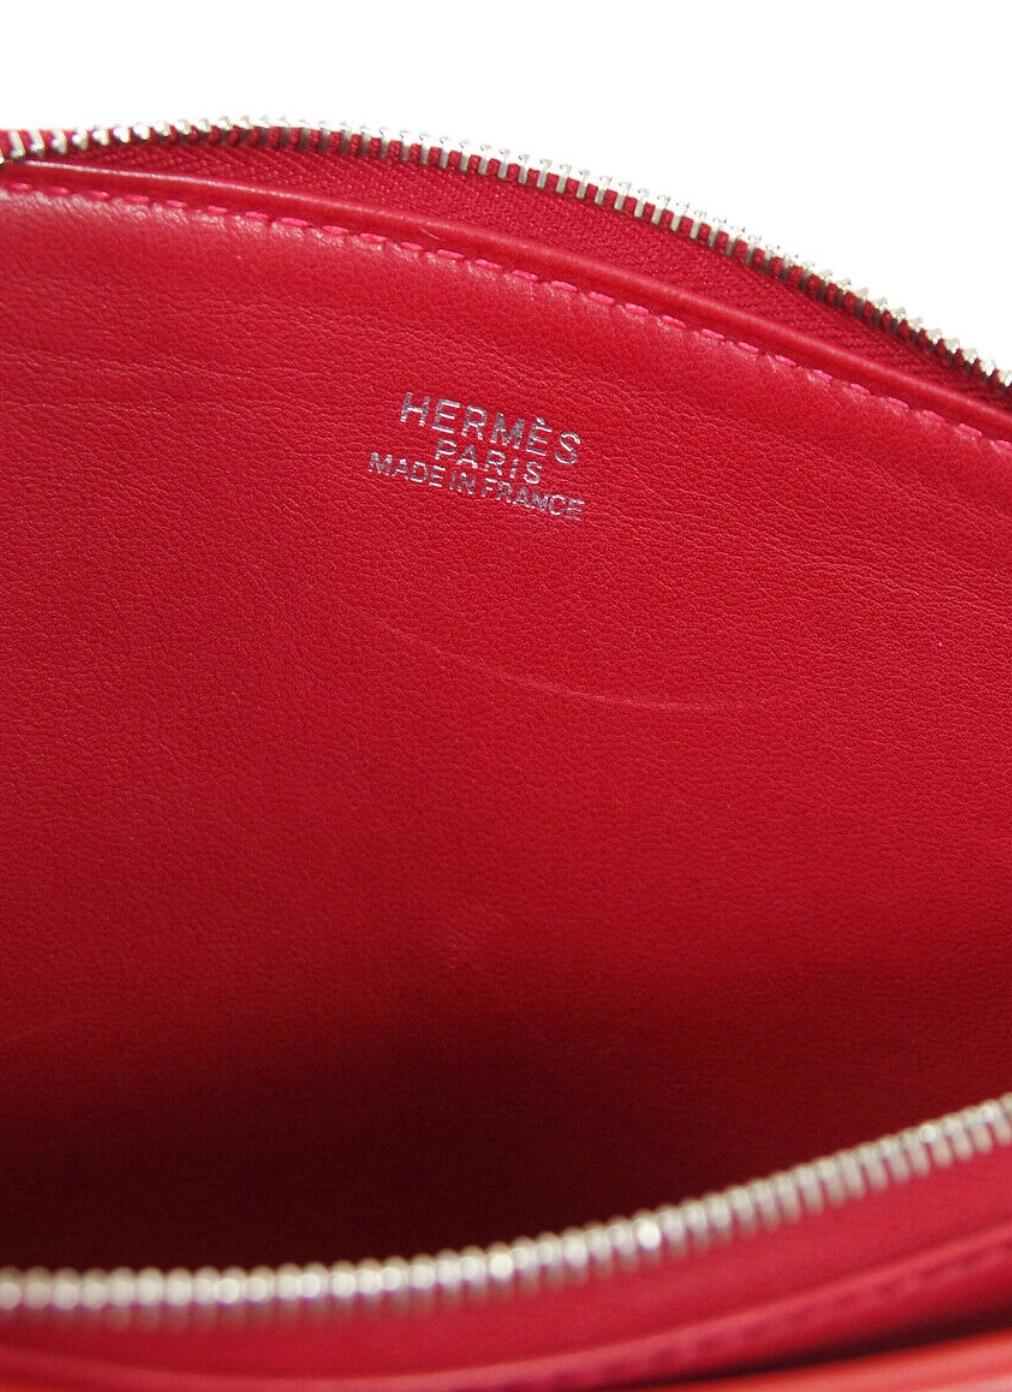 Hermes Red Leather Silver Carrryall Shoulder Top Handle Satchel Small Bag 2